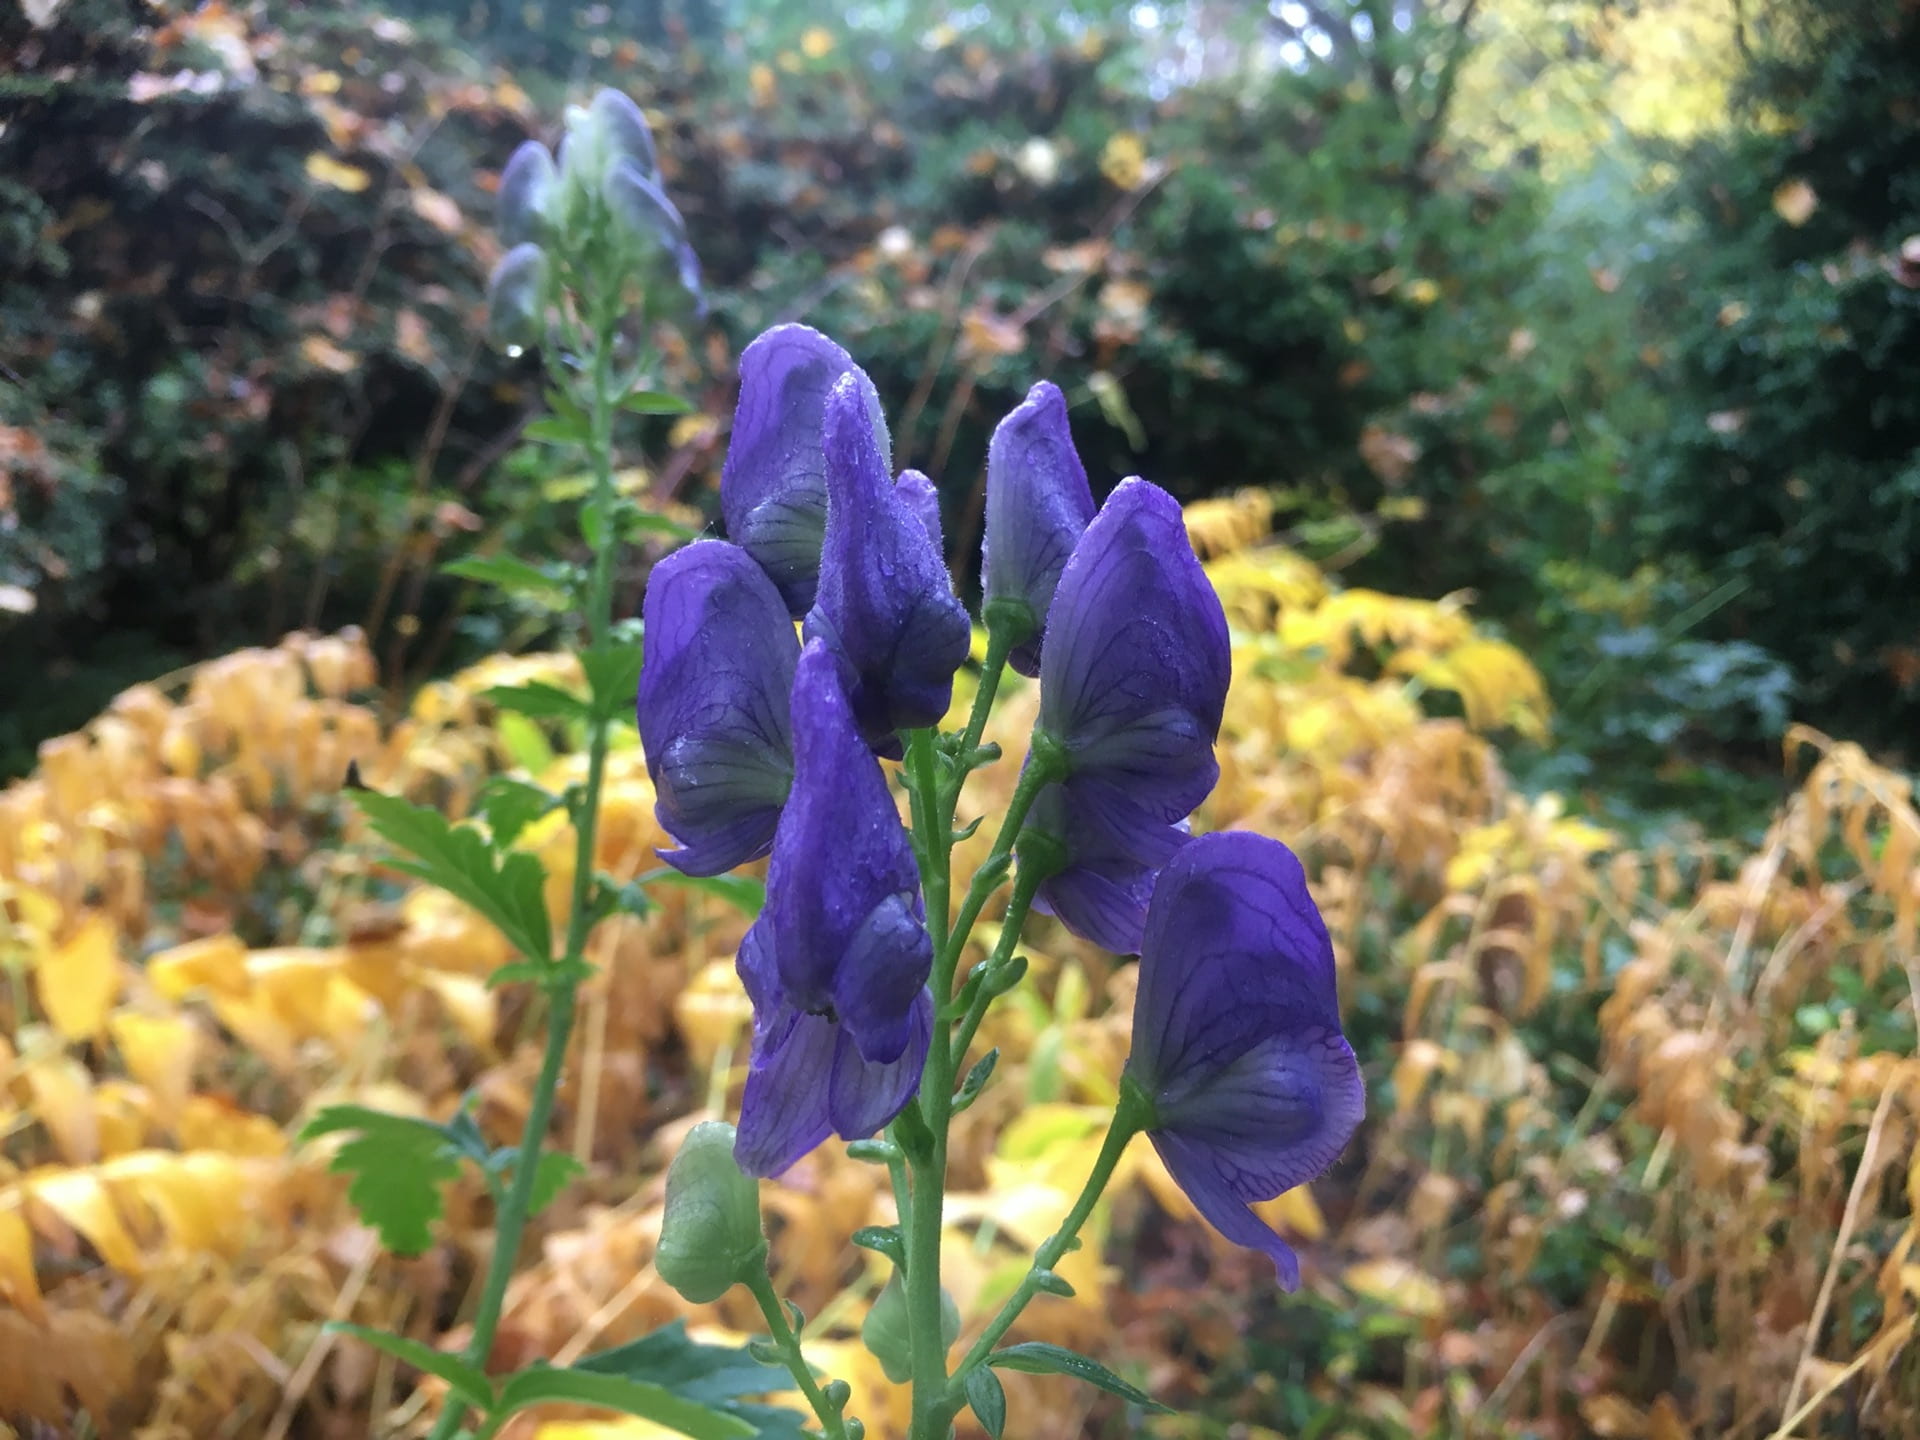 The hooded flowers of Aconitum carmichaelii 'Arendsii' contrasts with the yellows of autumn.